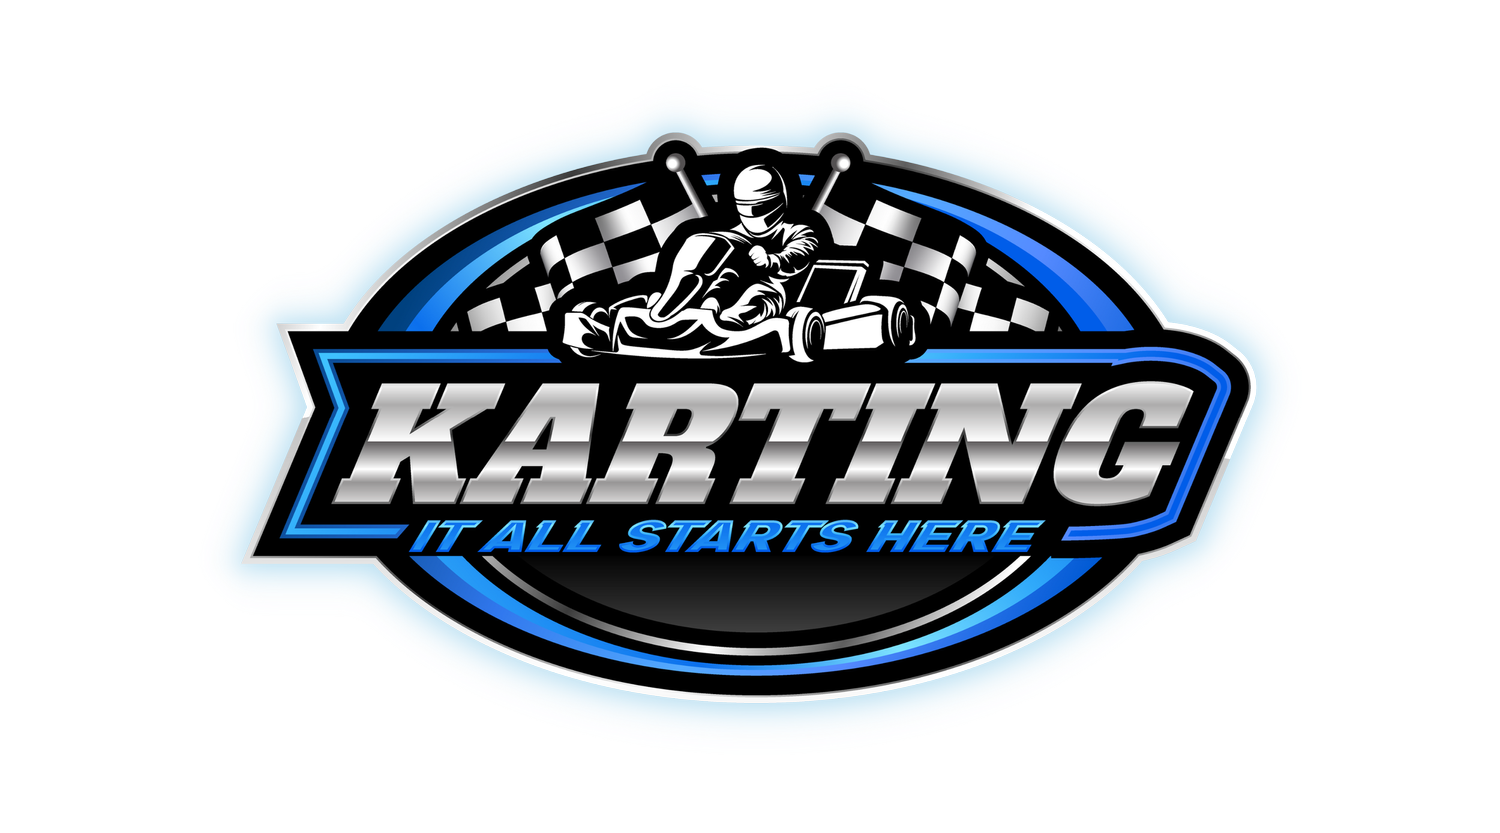 KARTING - It All Starts Here